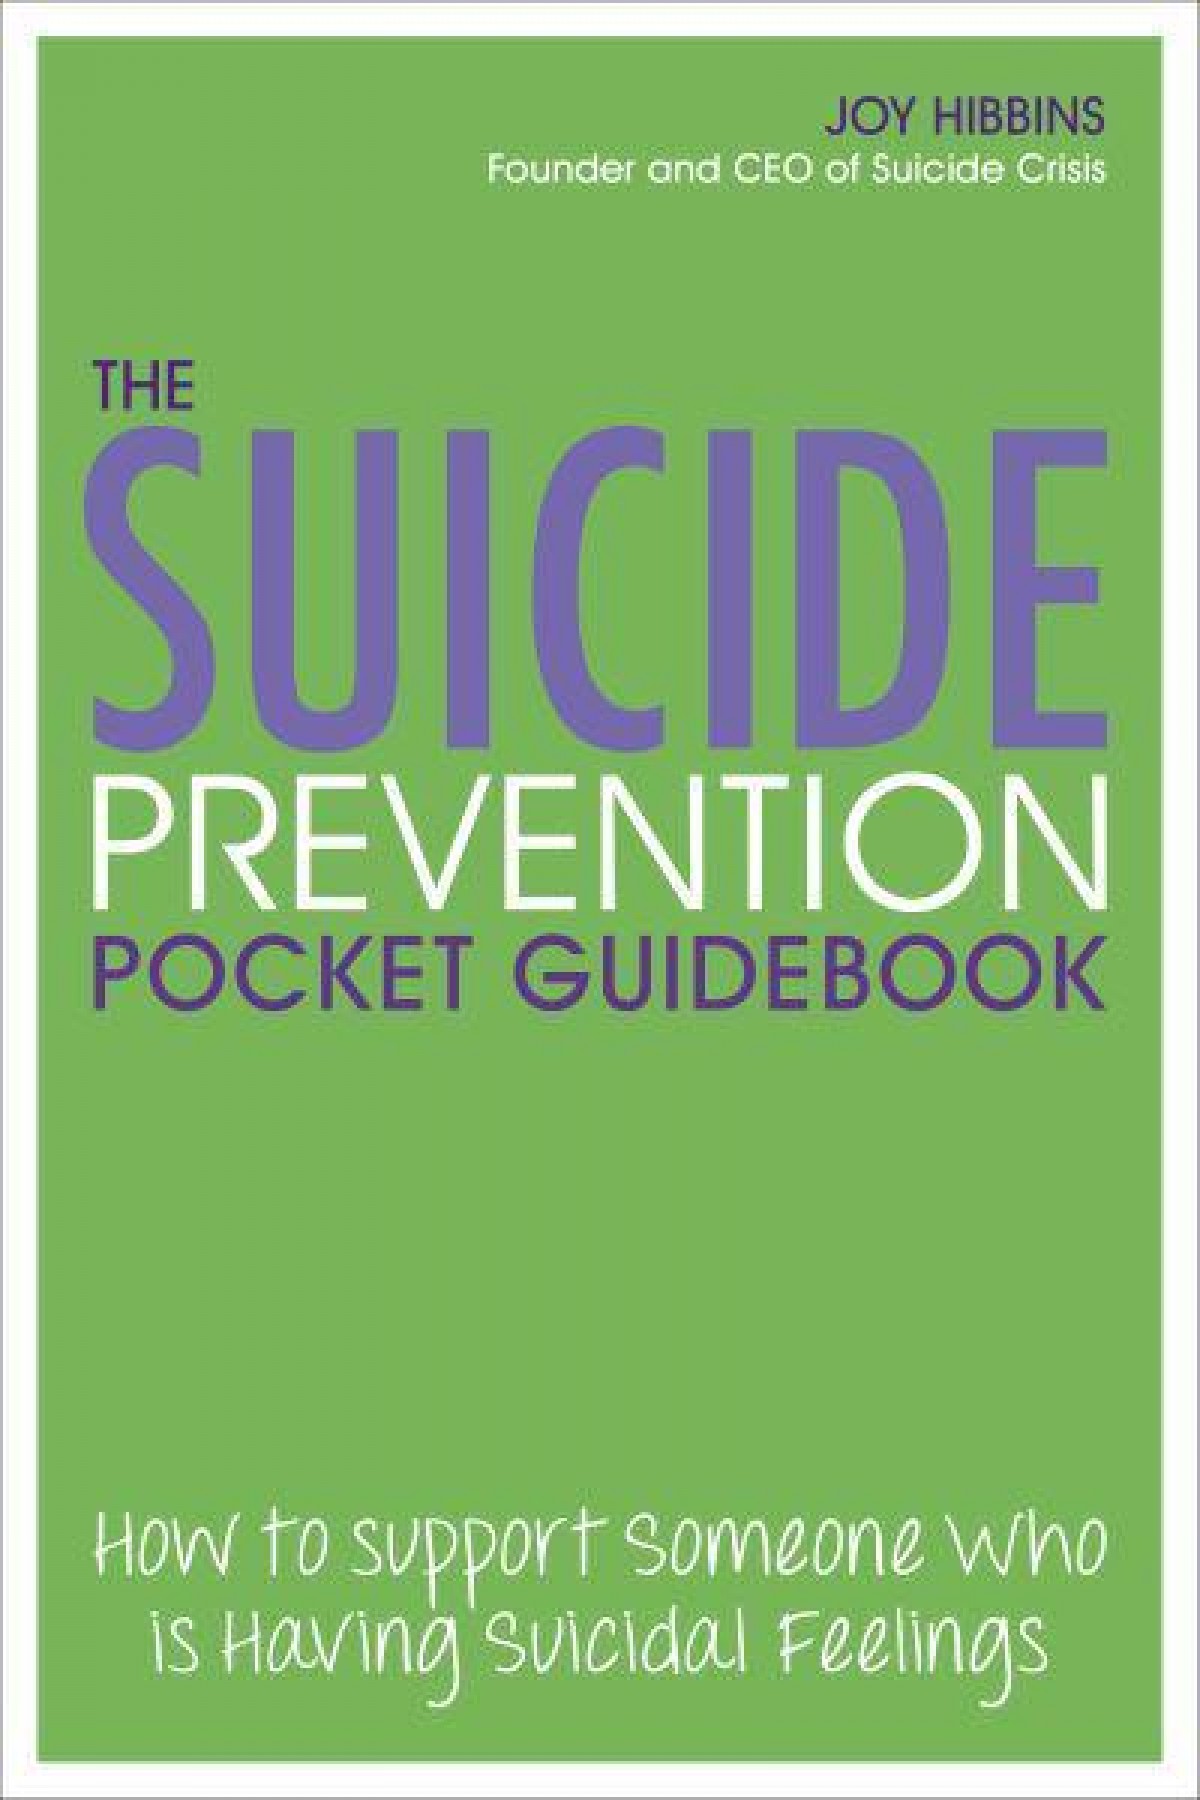 The suicide prevention pocket guidebook: How to support someone who is having suicidal feelings